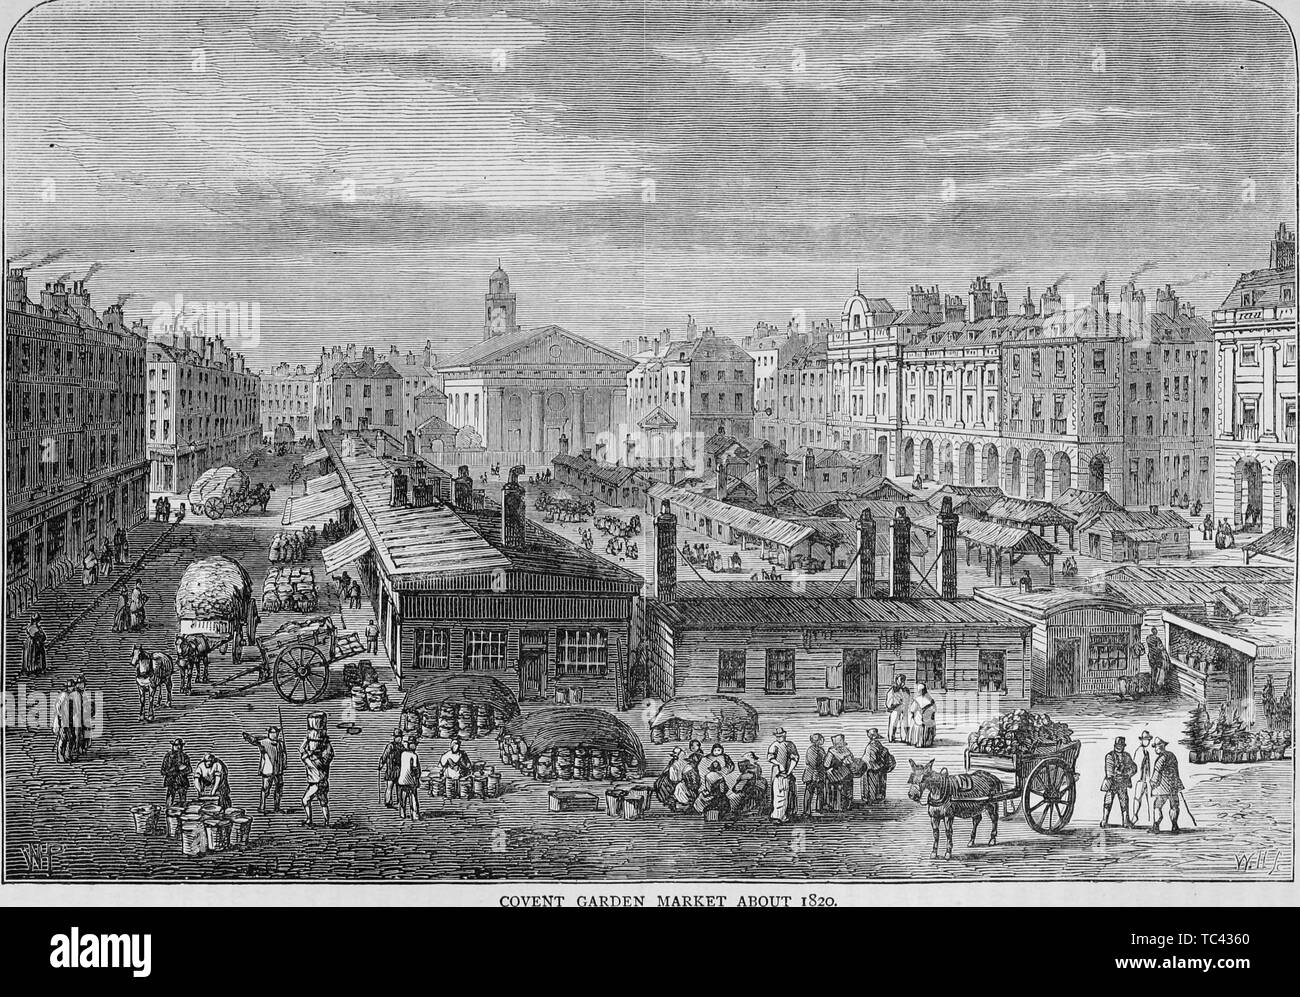 Engraving of the Covent Garden market in London, England, from the book 'Old and new London: a narrative of its history, its people, and its places' by Thornbury Walter, 1873. Courtesy Internet Archive. () Stock Photo